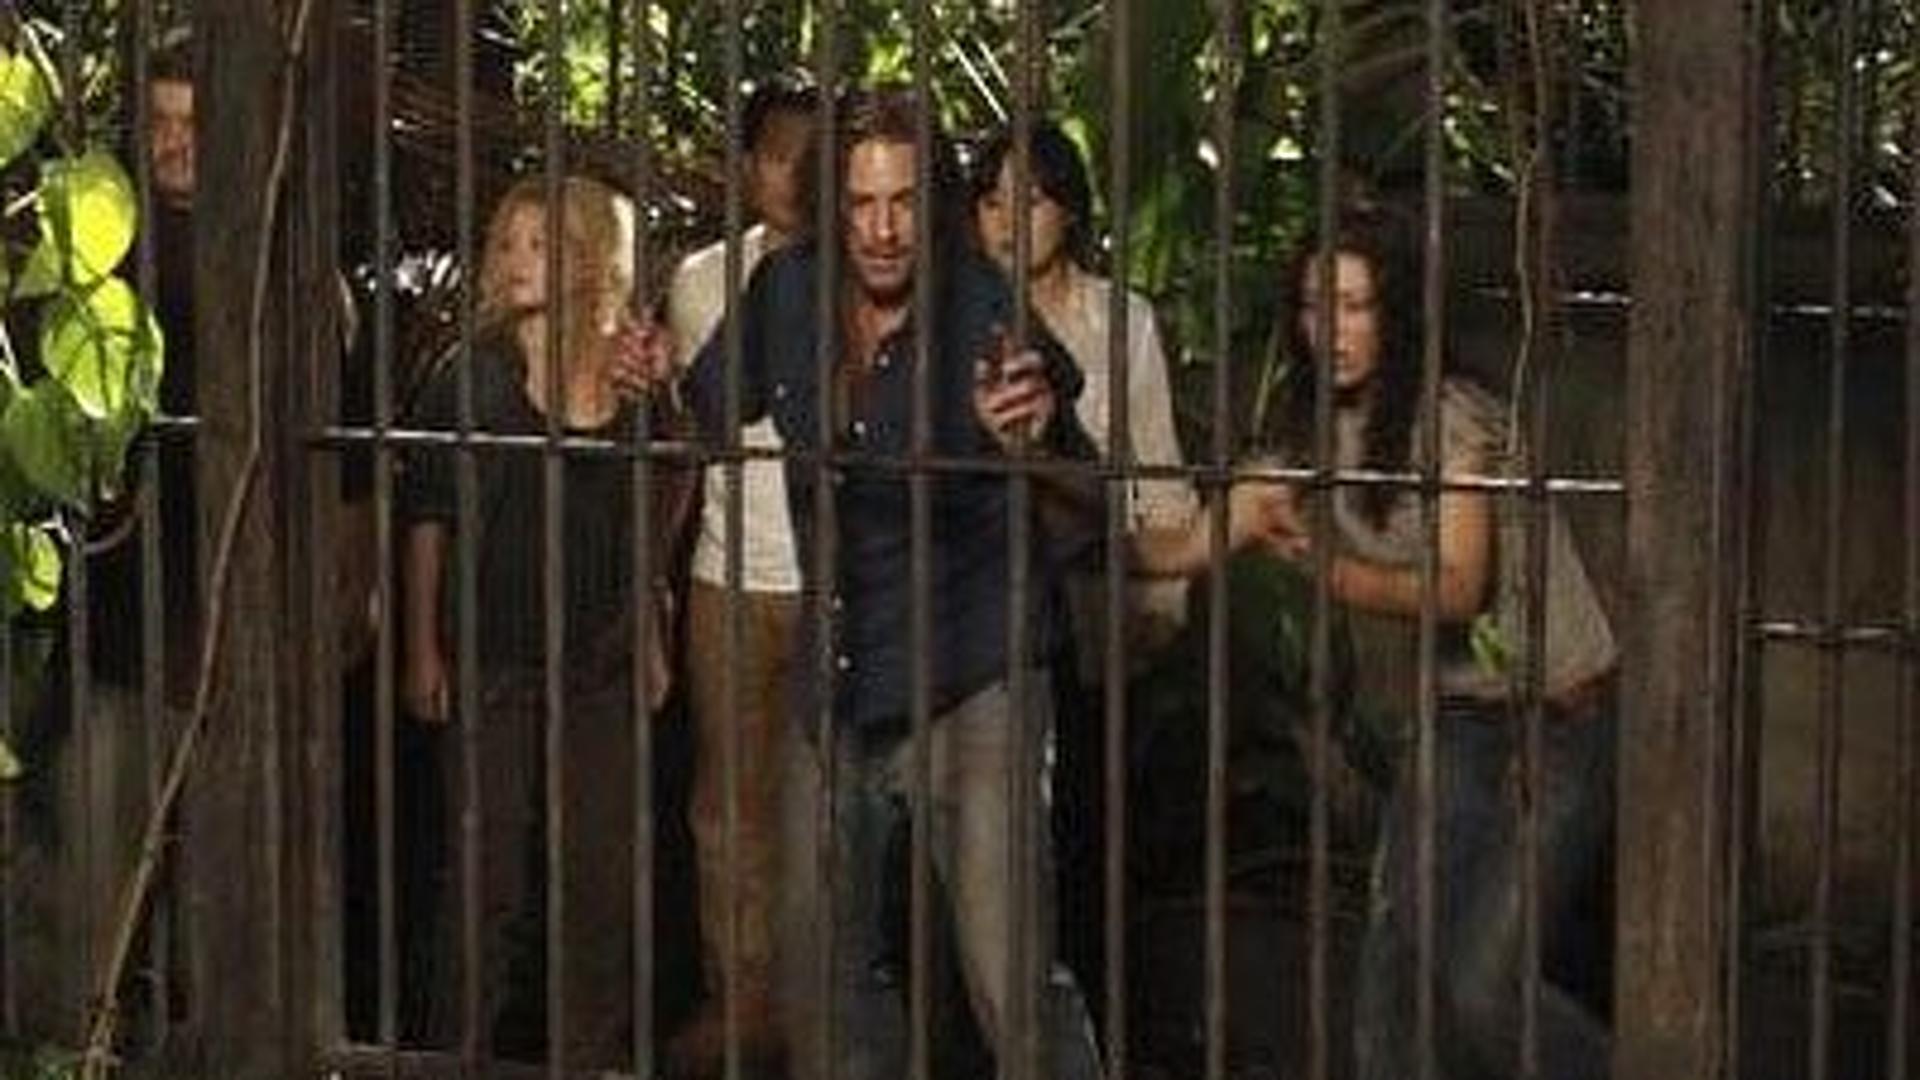 lost s06e14 torrent